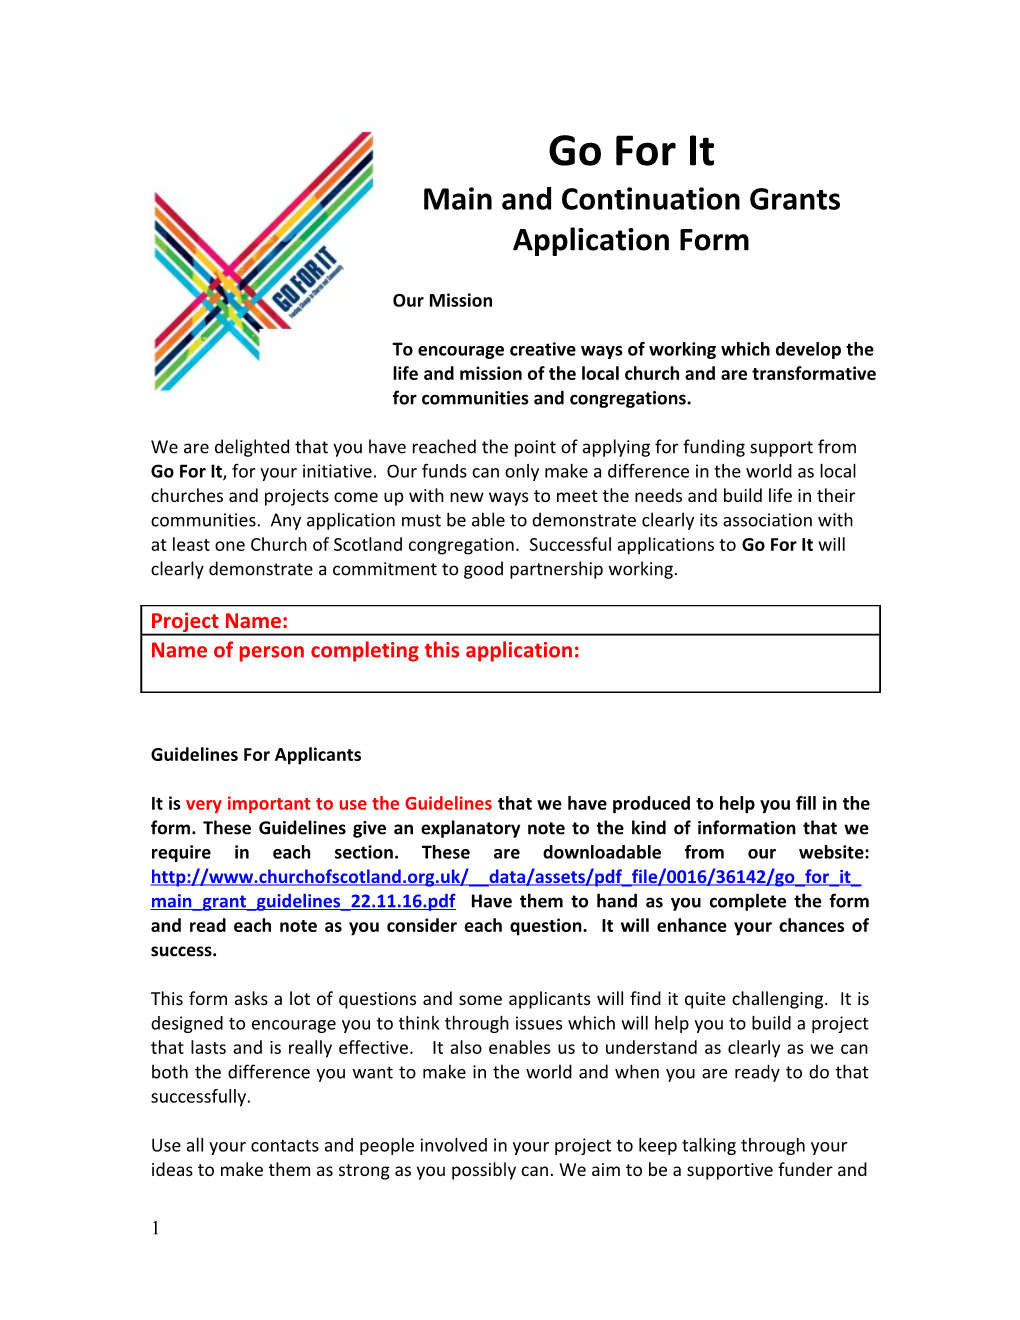 Main and Continuation Grants